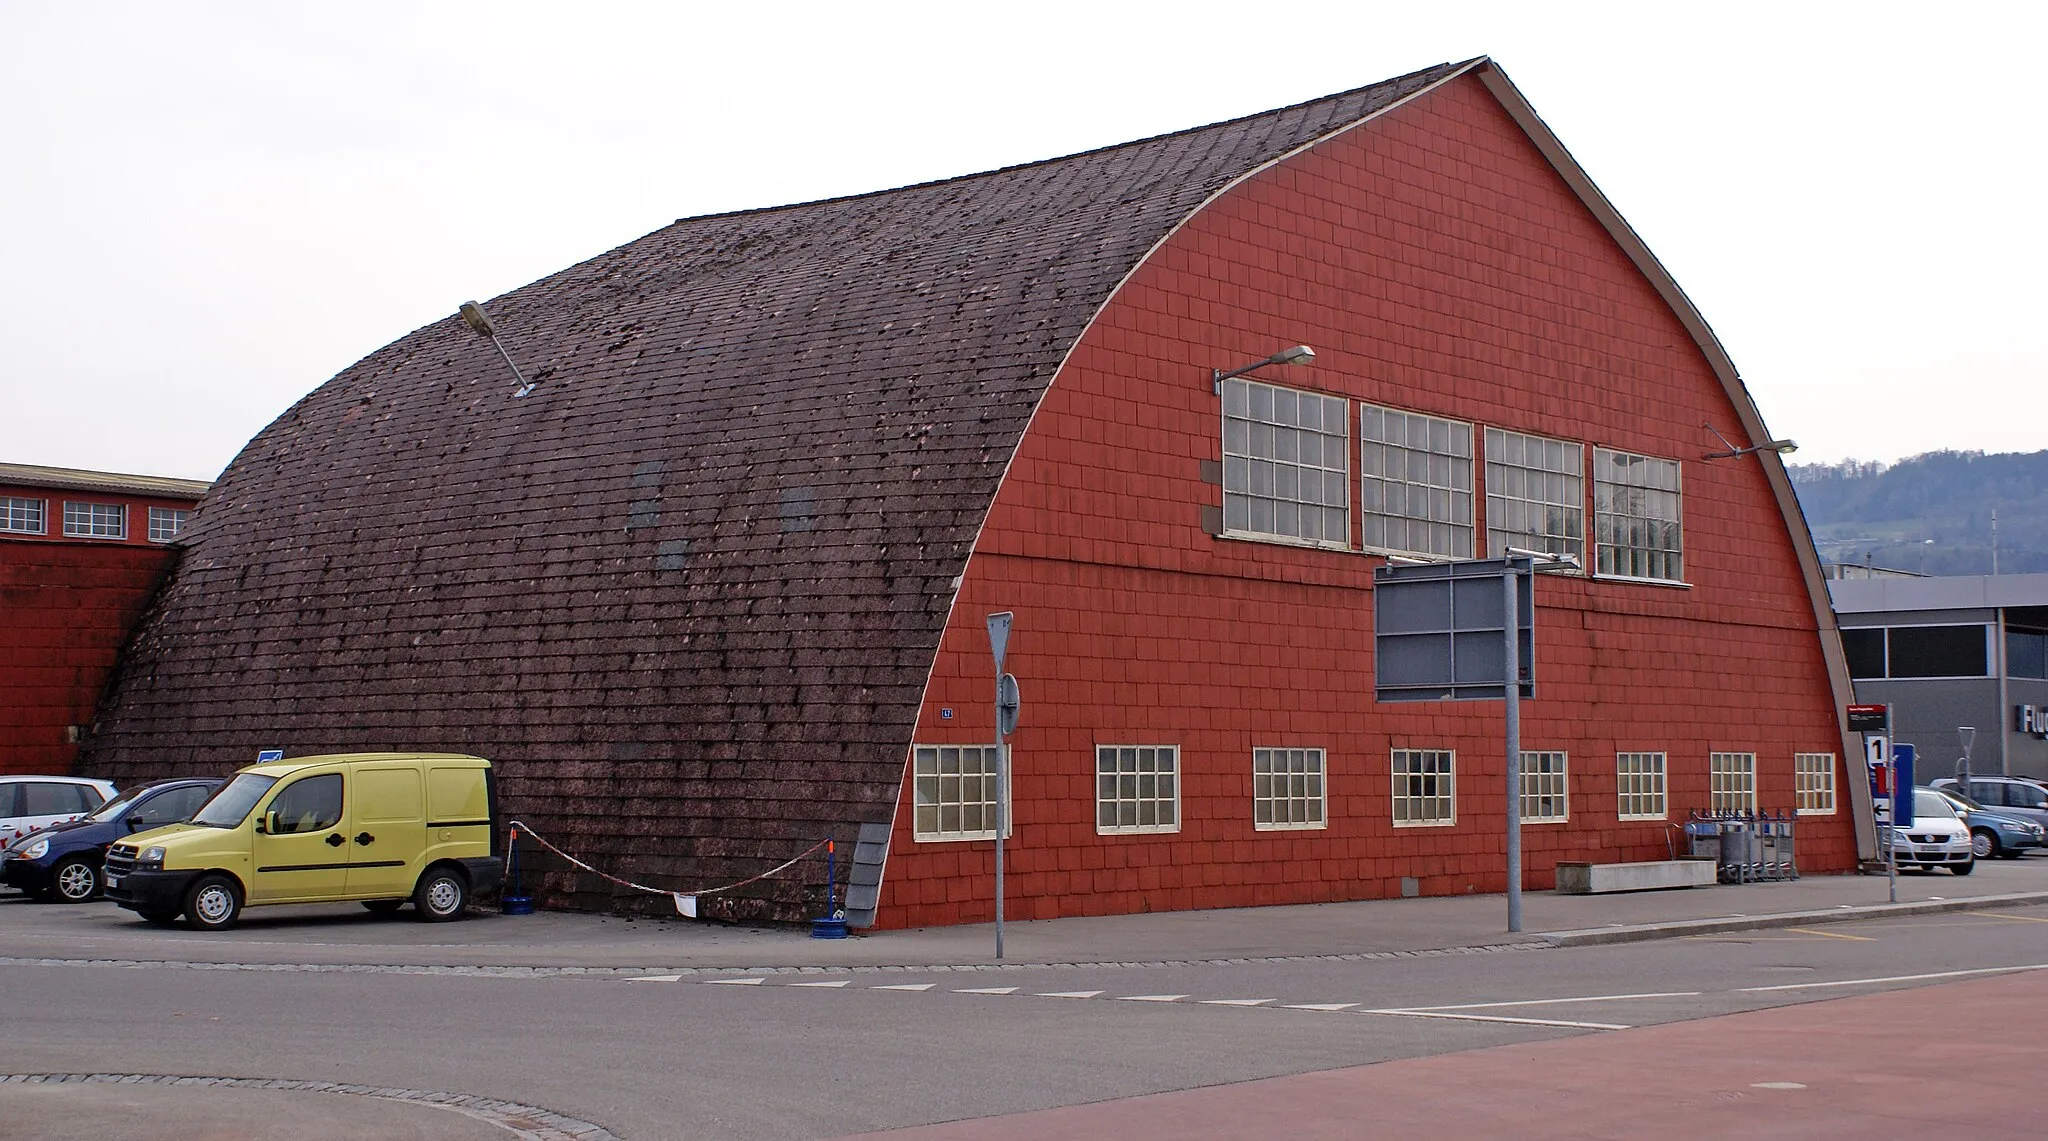 Photo showing: The Biderhangar at Berne Airport, Switzerland. Built by Swiss aviation pioneer Oscar Bider, the hangar is classified as a heritage site of national significance.